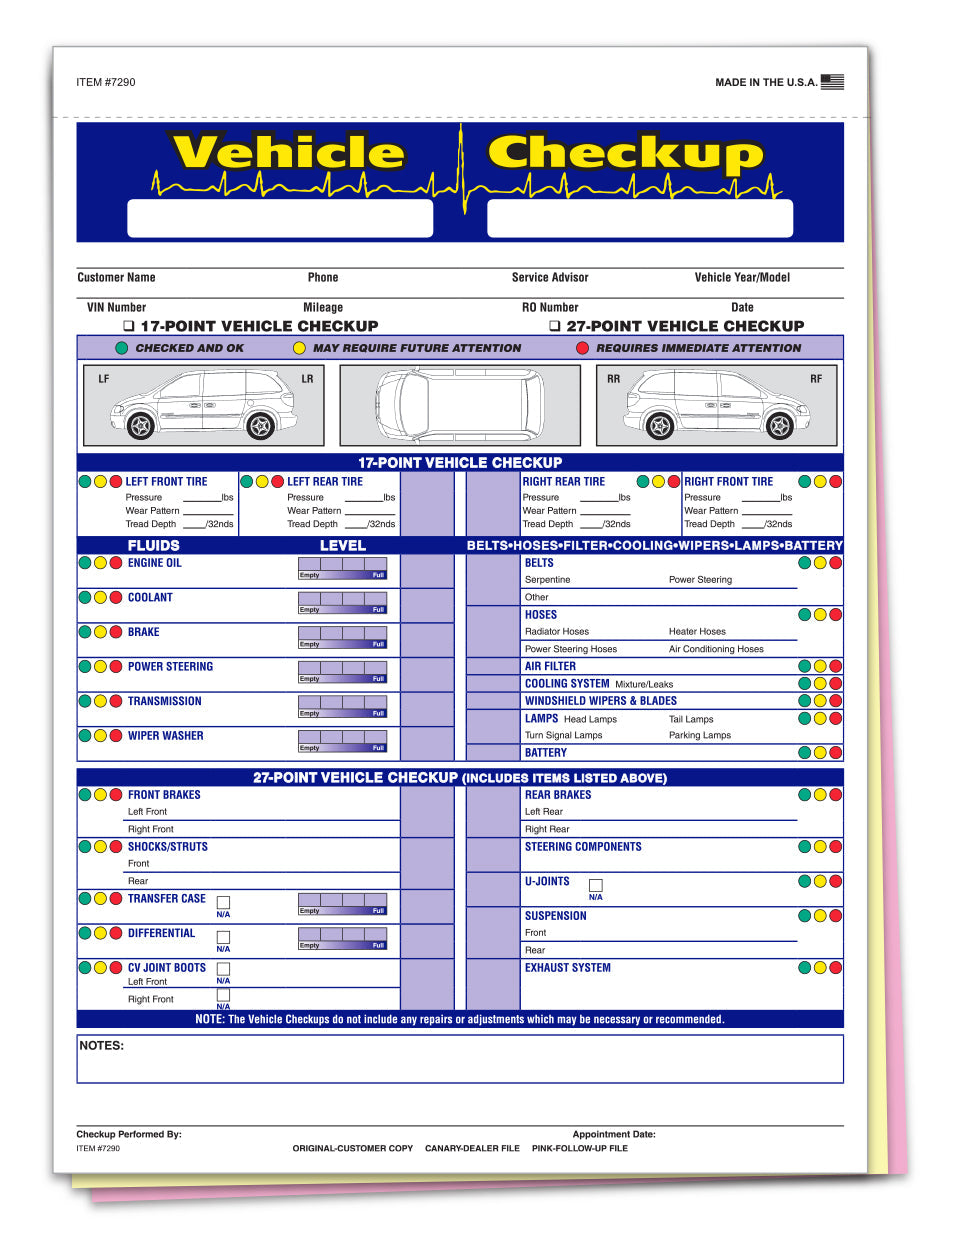 Vehicle Checkup/Inspection Report - 3 Part